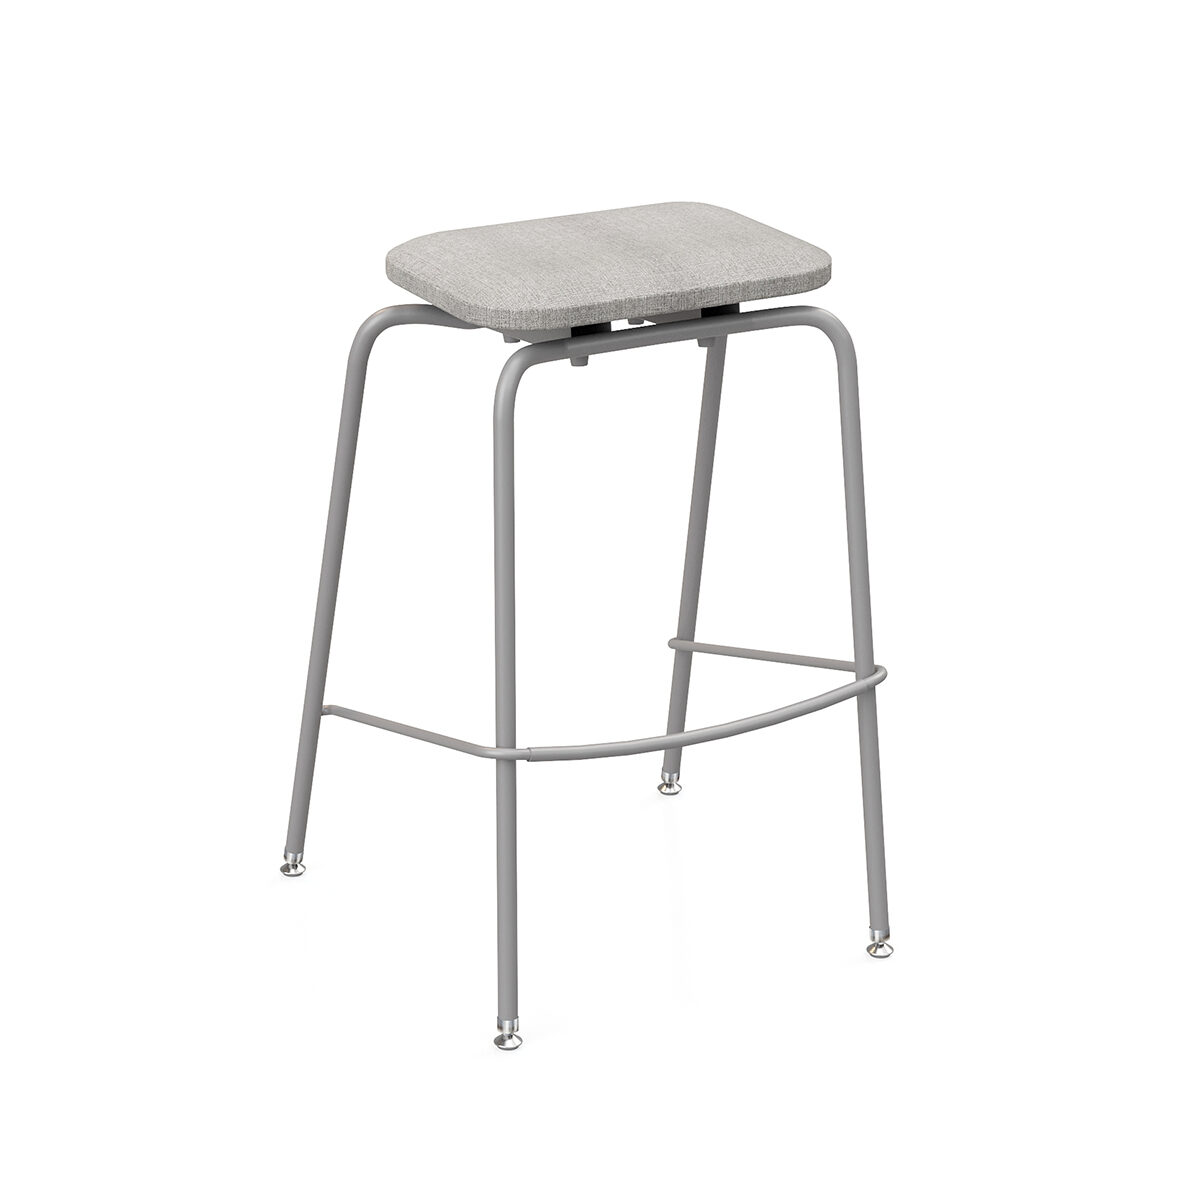 30" Groove Backless Stool